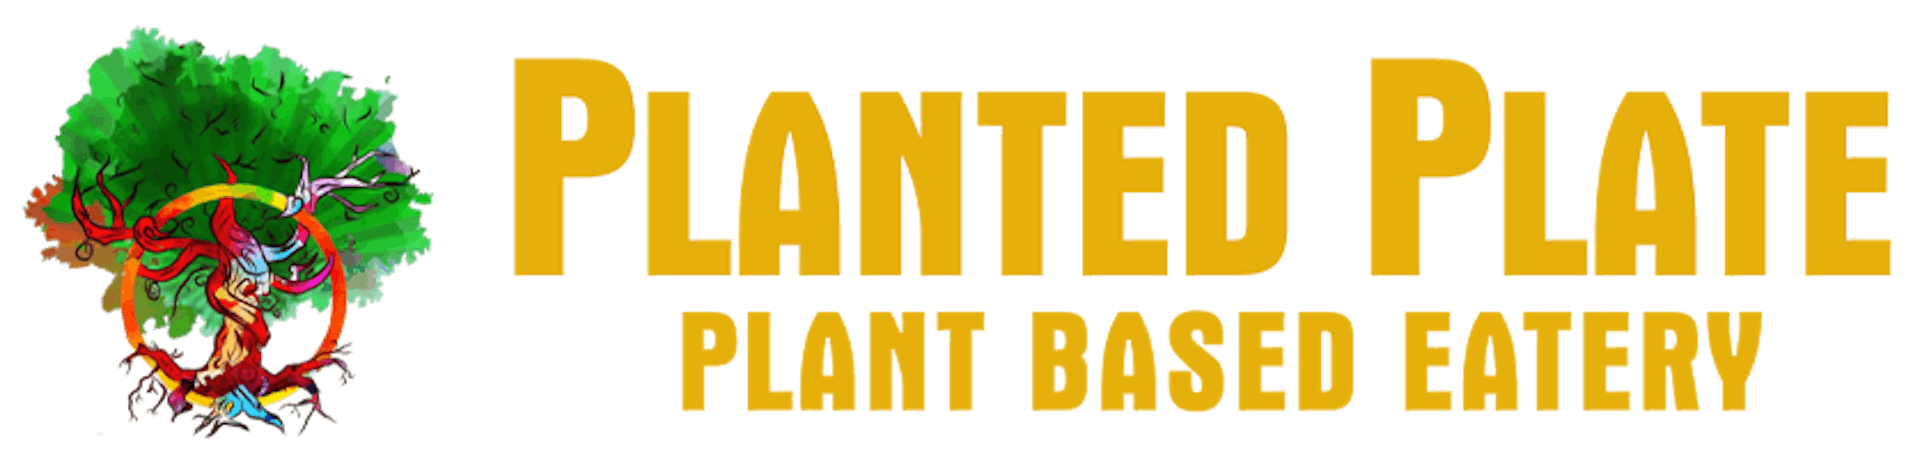 PLANTED PLATE